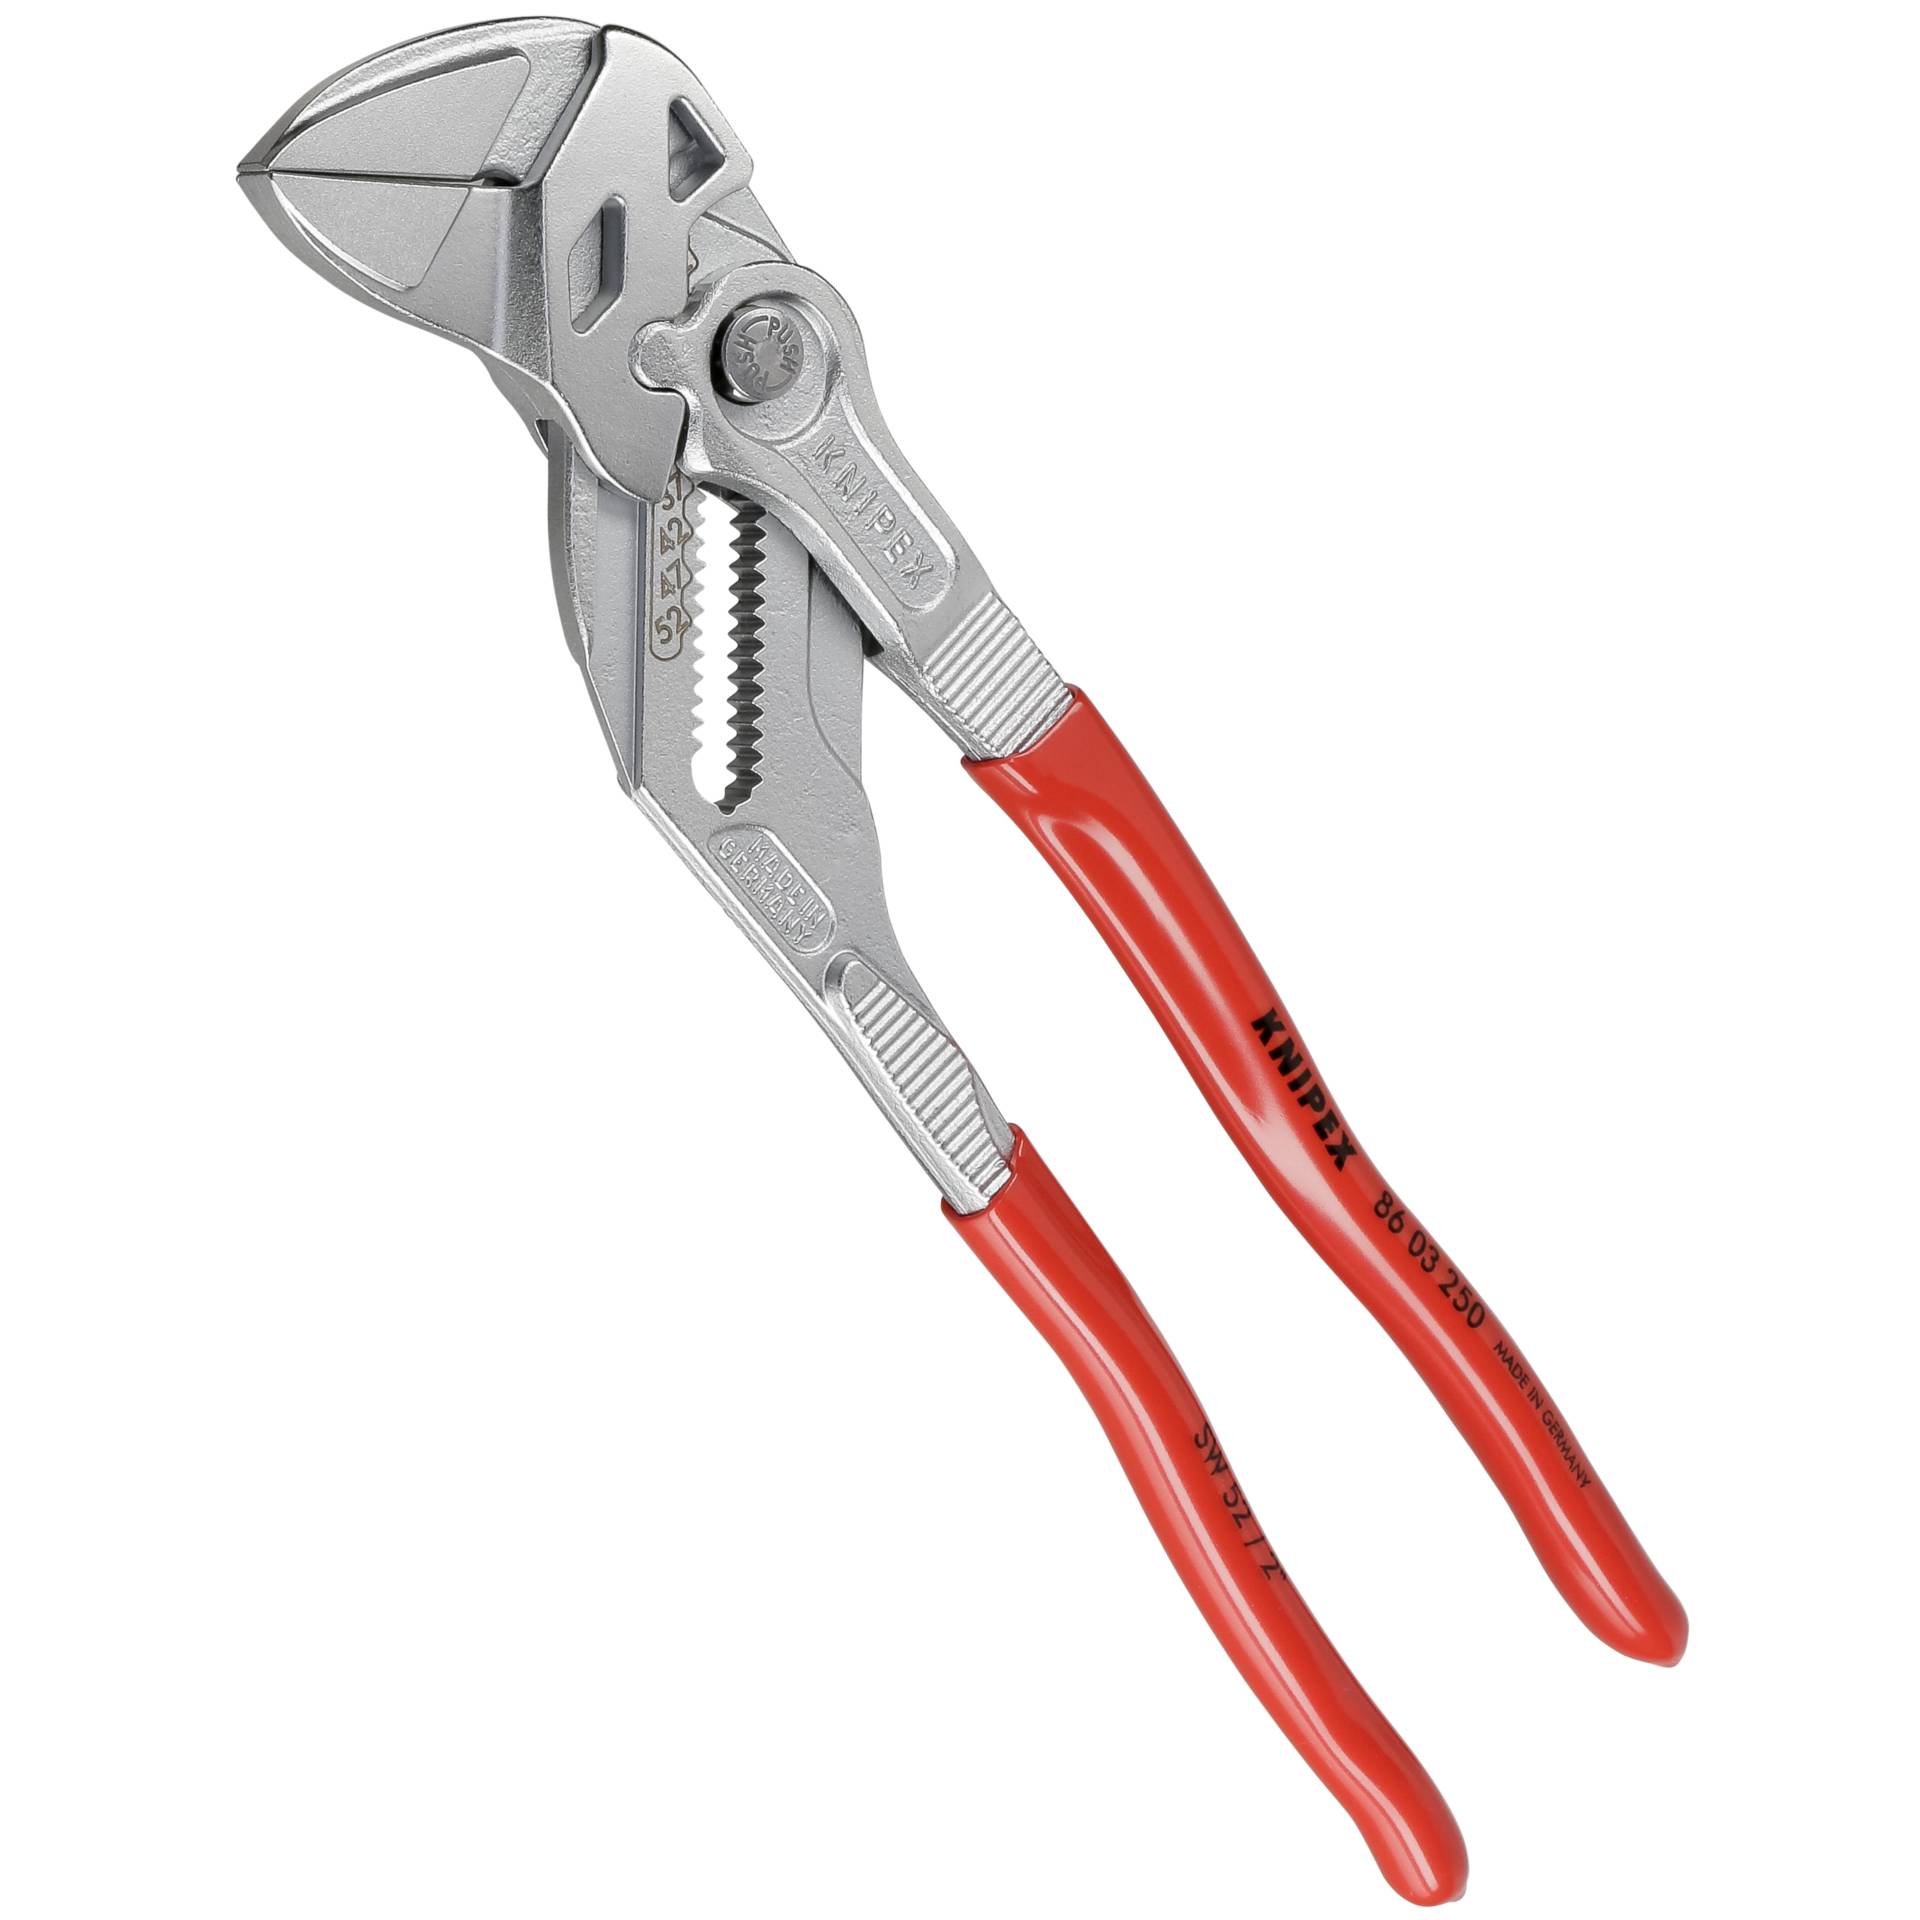 KNIPEX Pinza chiave 250 mm Rivestimento in resina sintetica